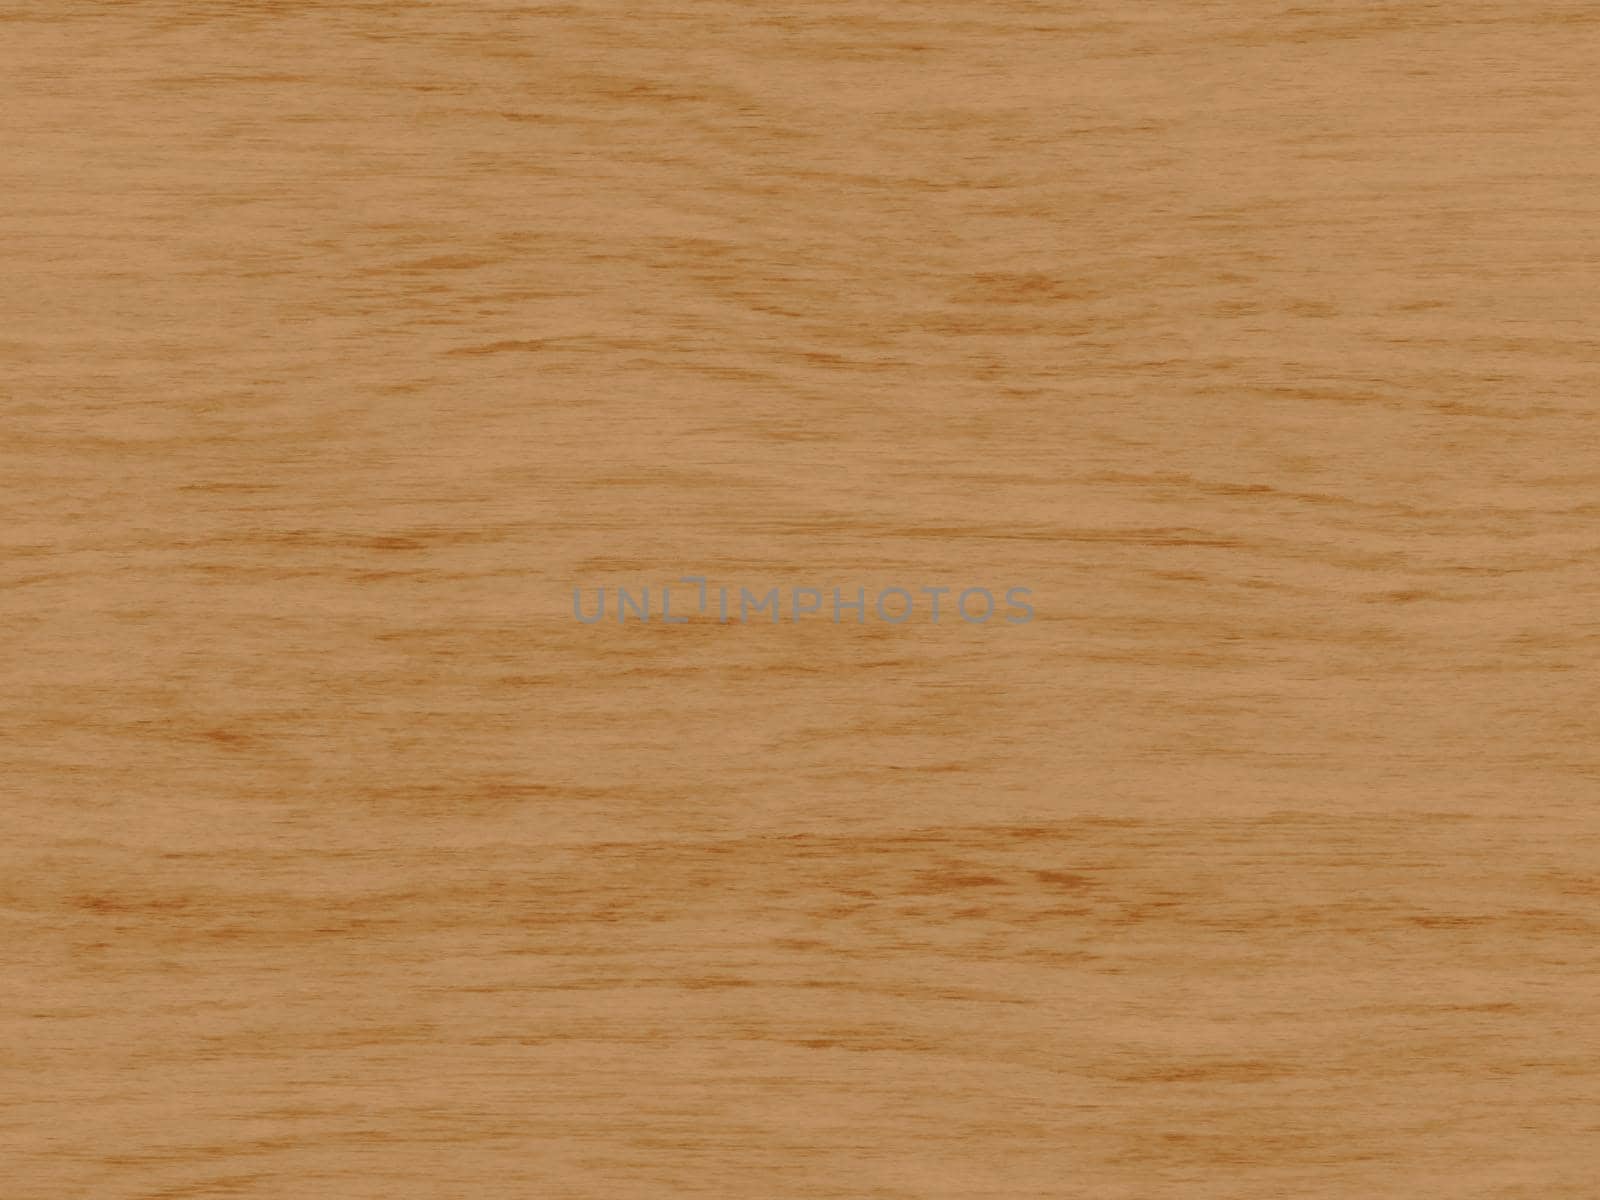 Natural white oak wood texture background. white oak veneer surface for interior and exterior manufacturers use.